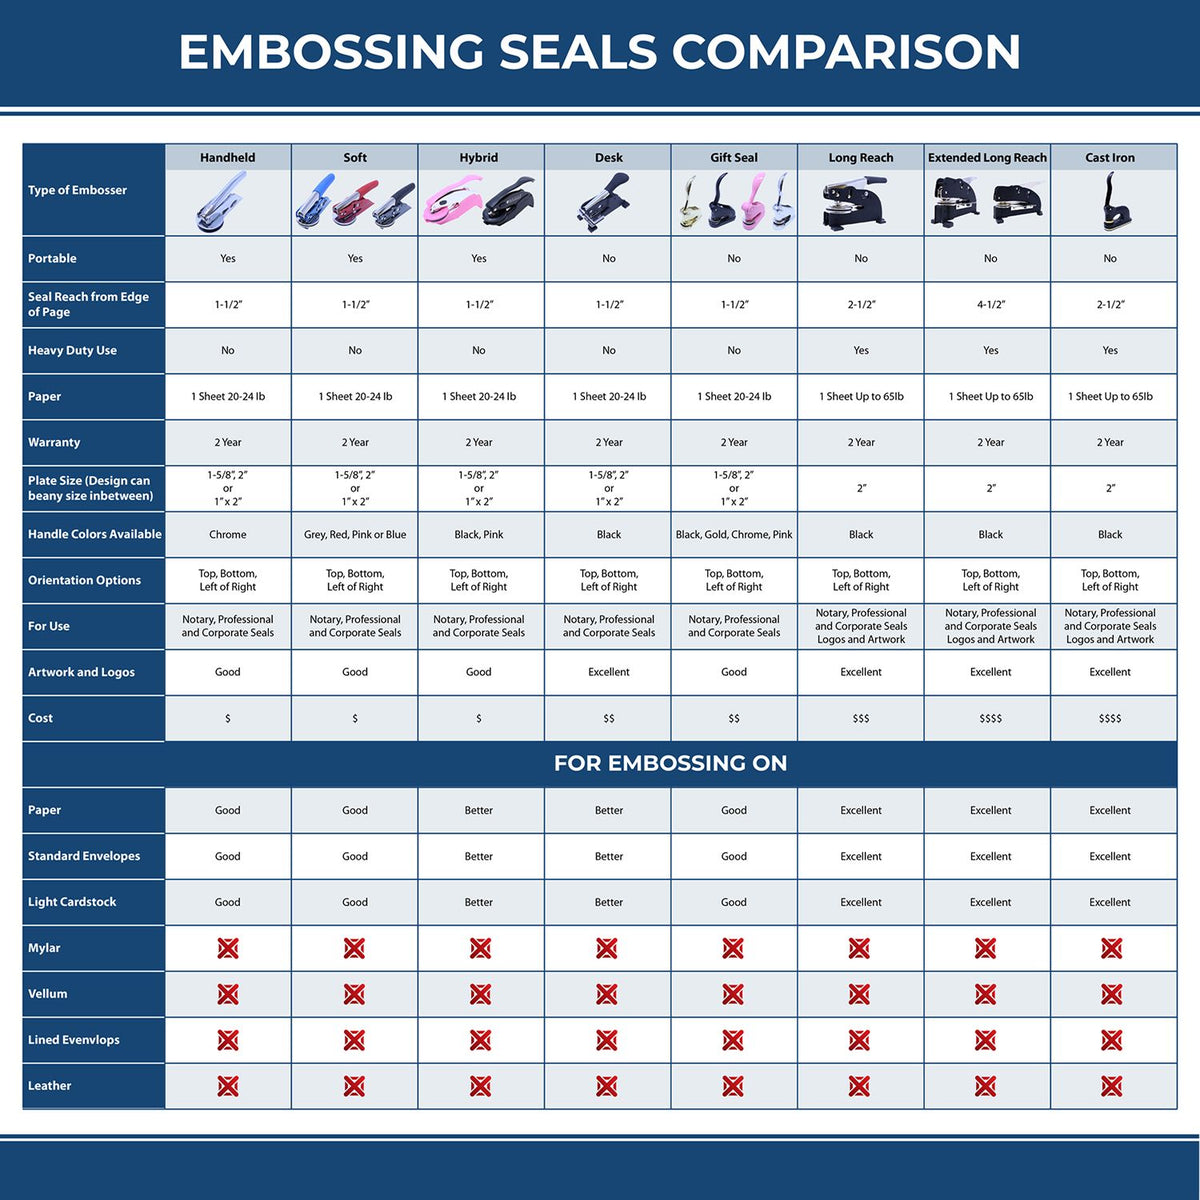 A comparison chart for the different types of mount models available for the Kentucky Desk Architect Embossing Seal.